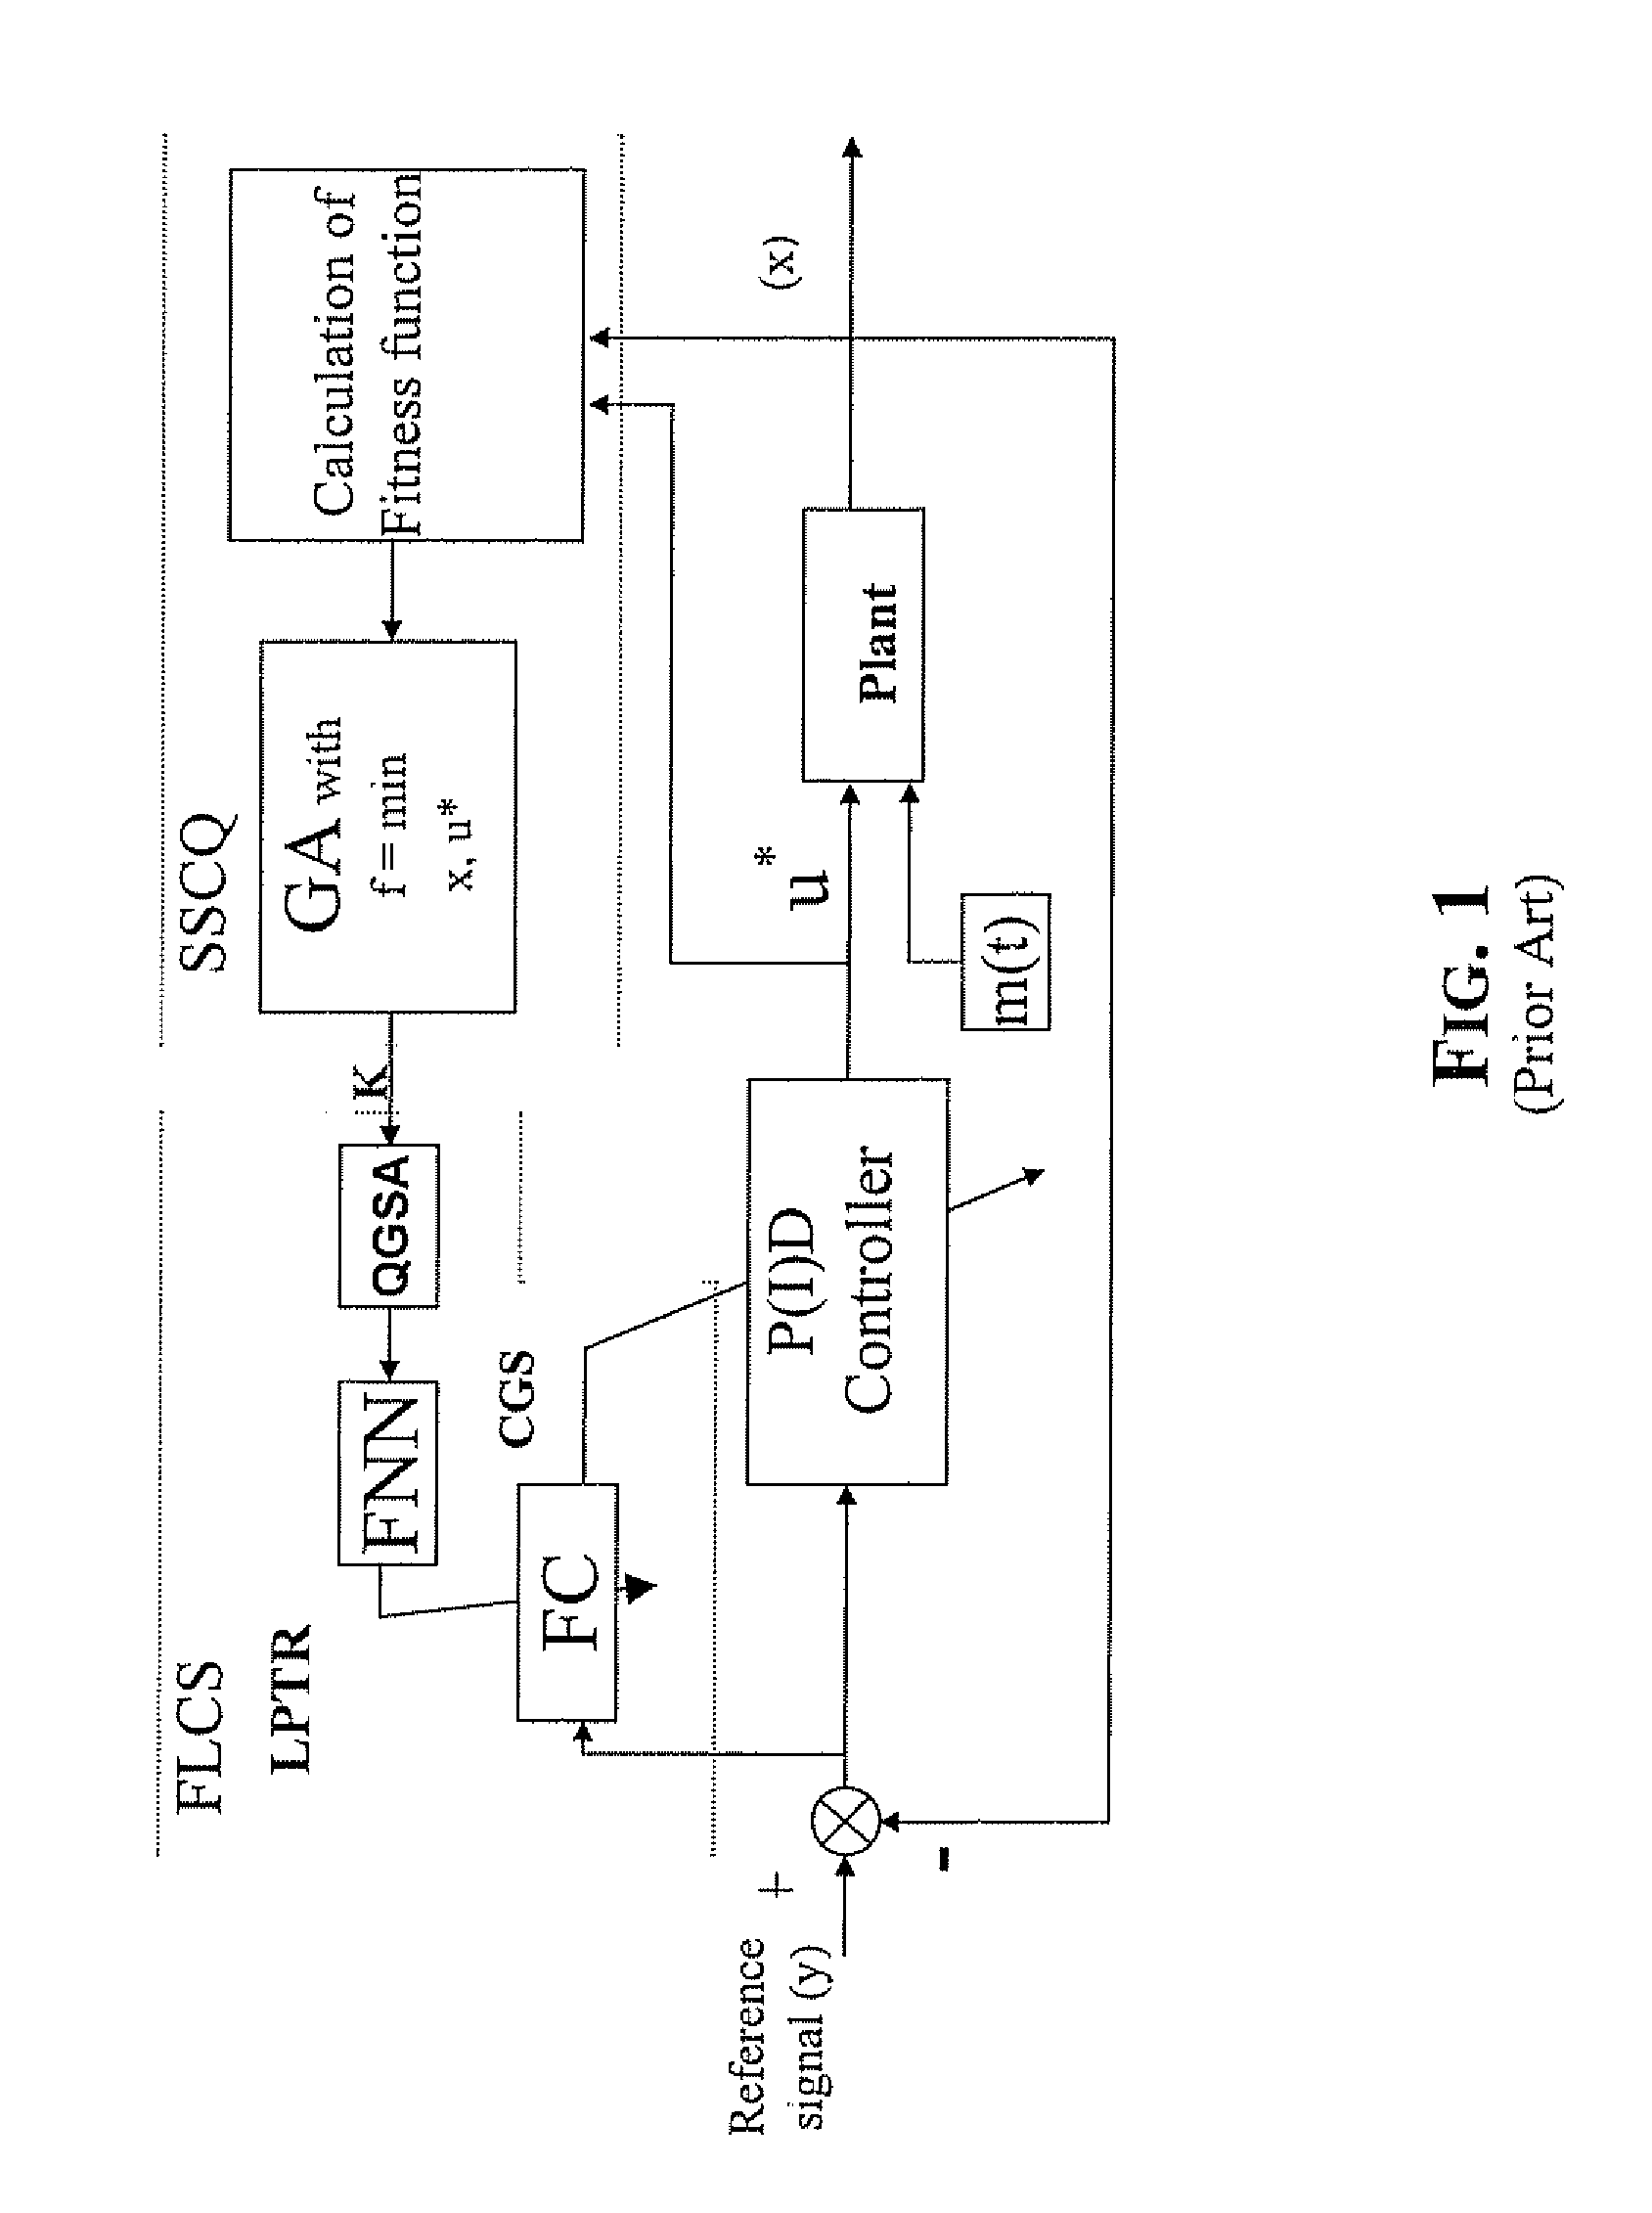 Method and device for performing a quantum algorithm to simulate a genetic algorithm